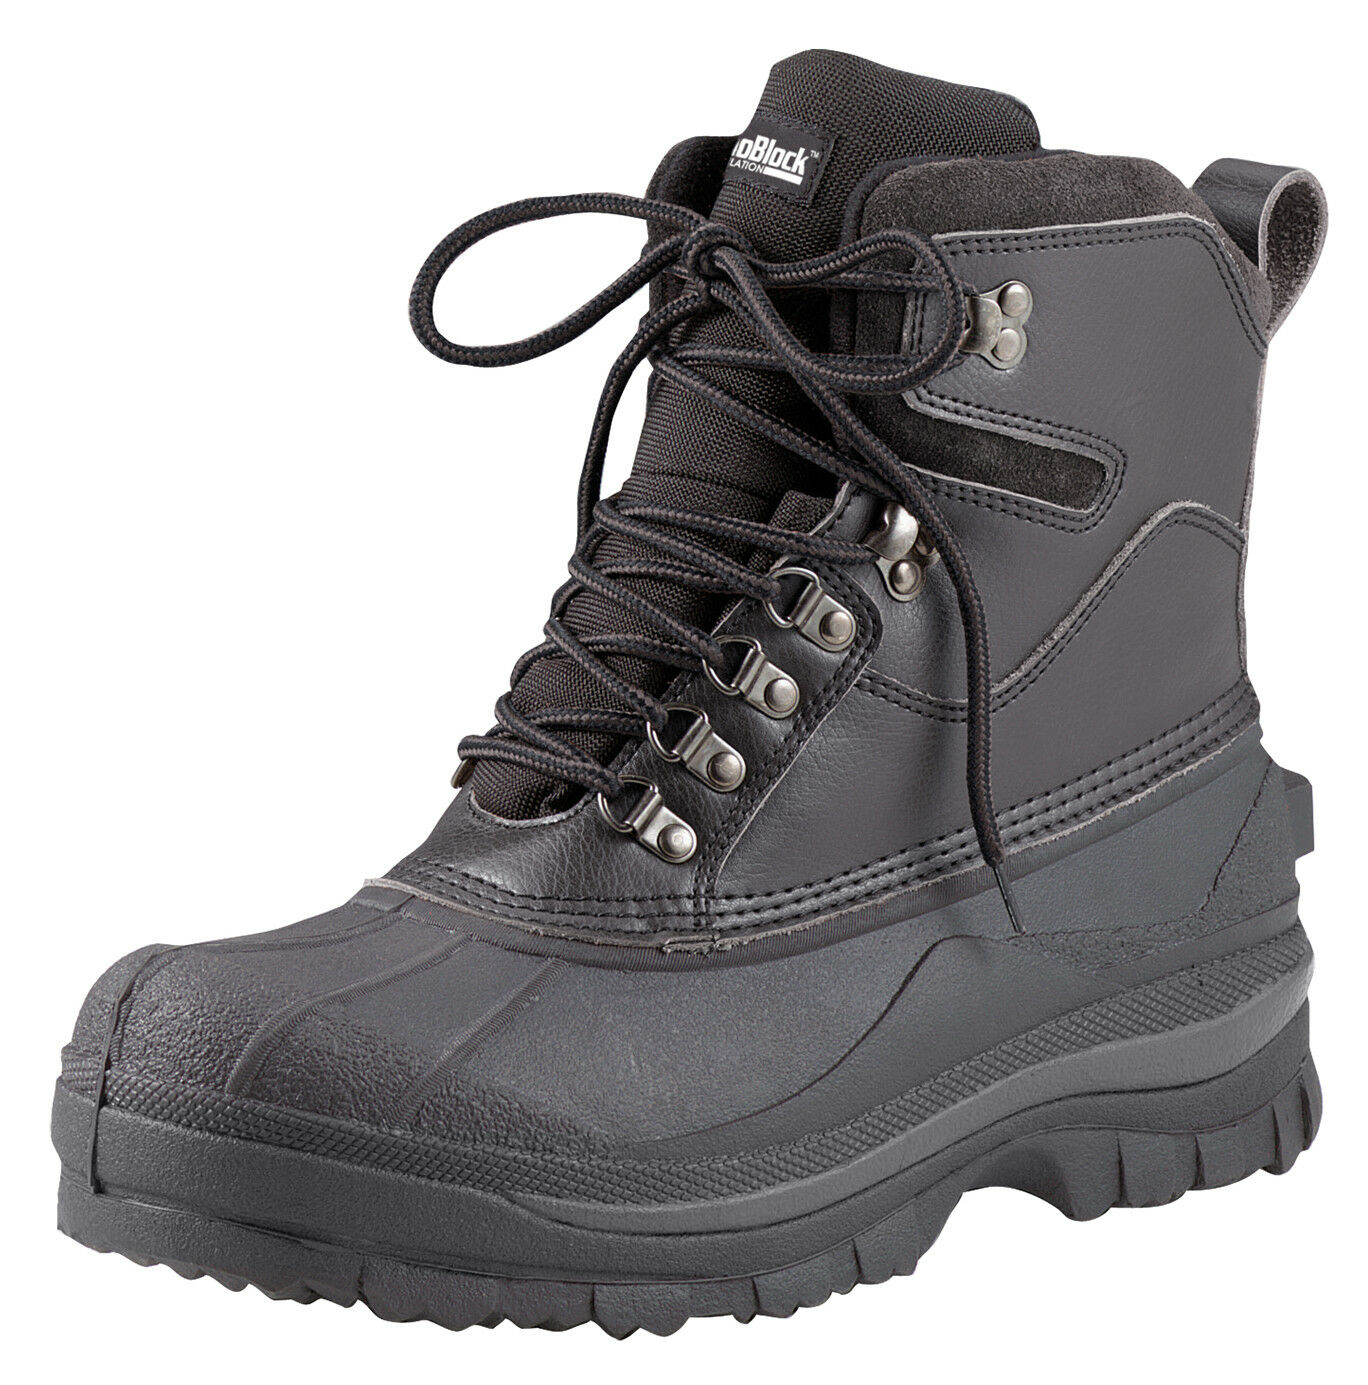 Rothco Cold Weather Hiking Boots - 8 Inch